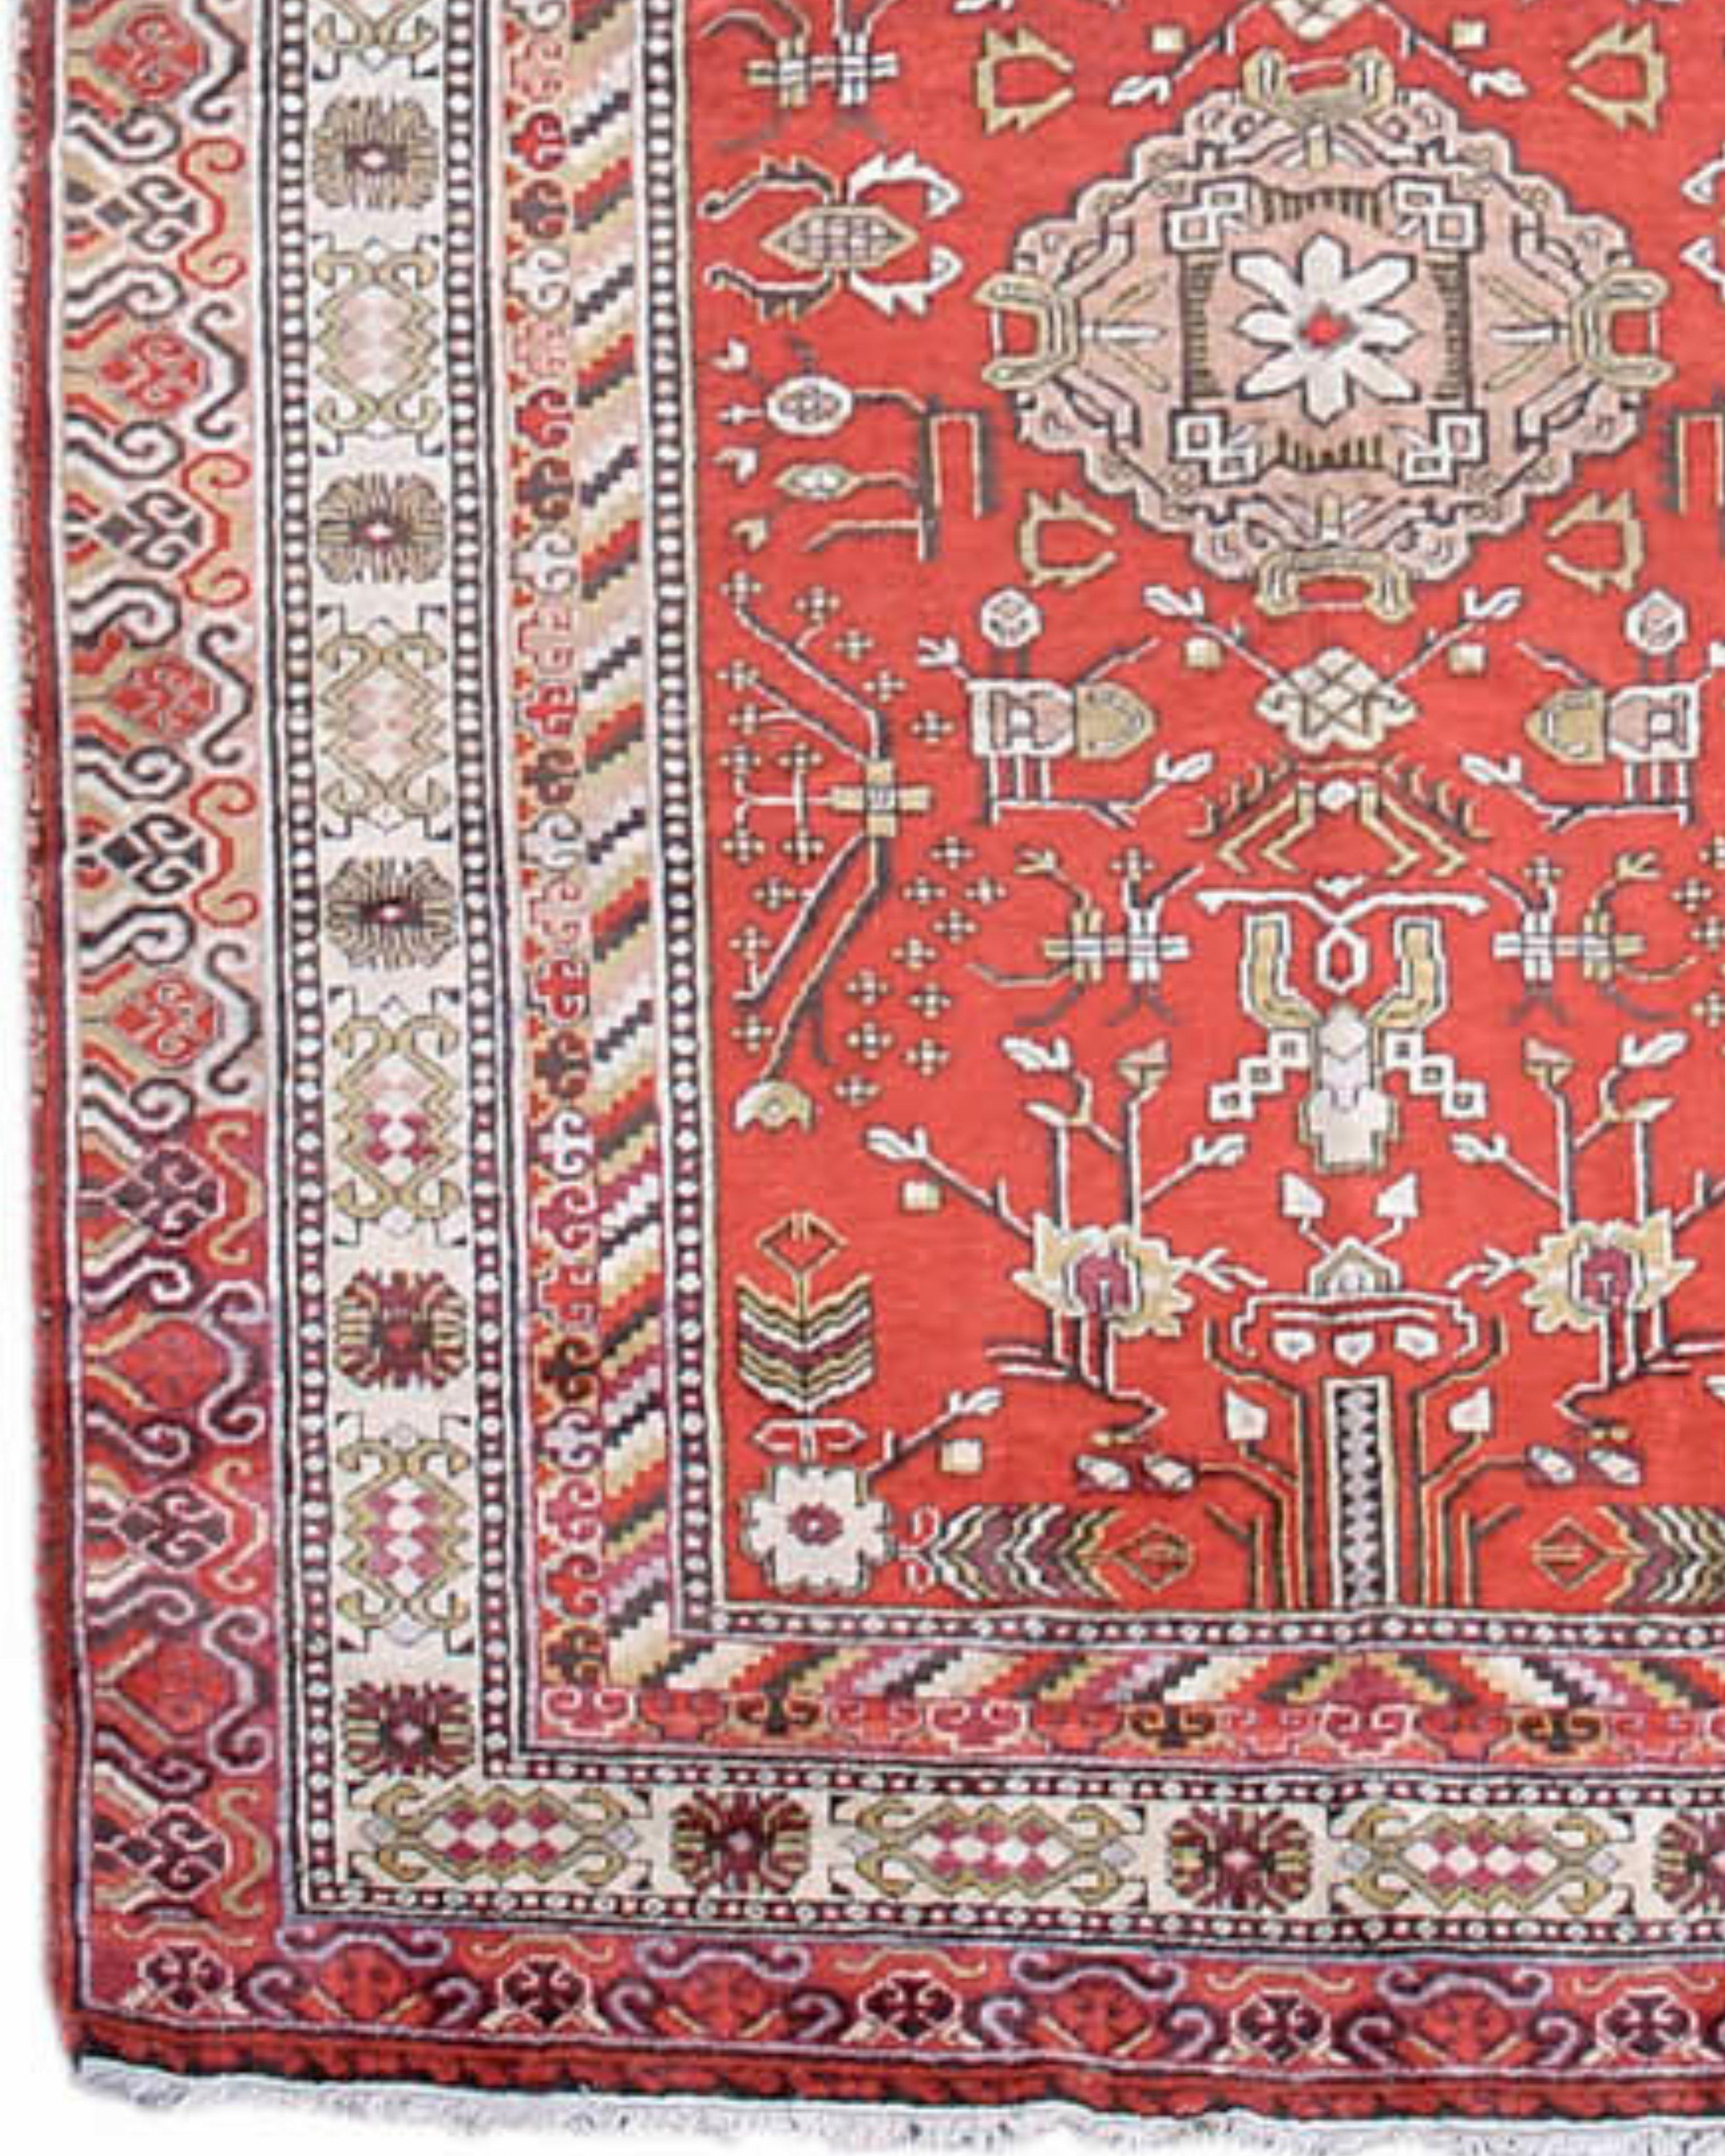 Hand-Woven Antique Khotan Rug, Early 20th Century For Sale